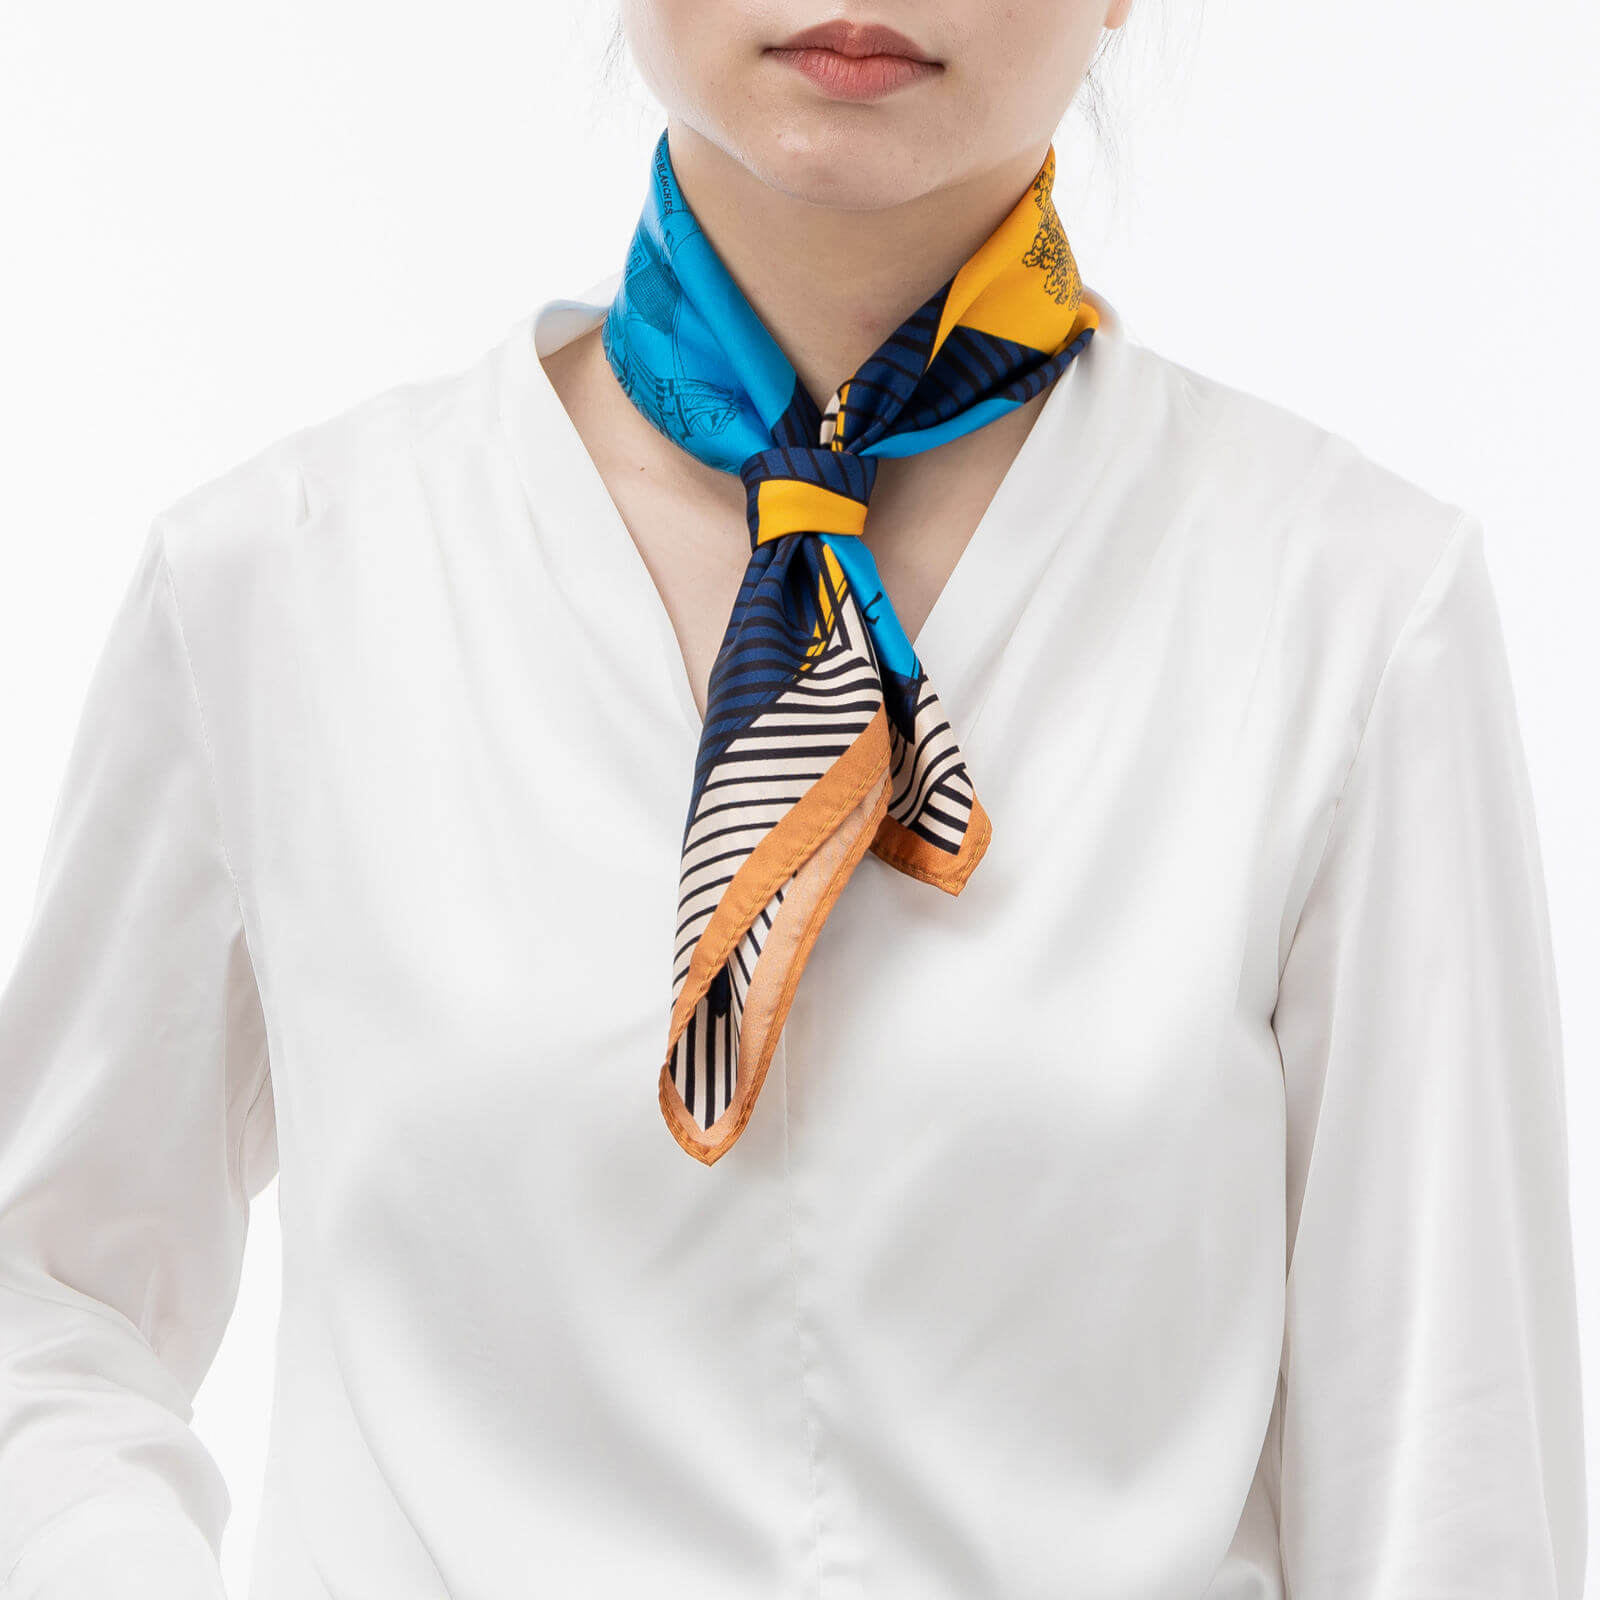 The silk scarf is squarely coming back in style